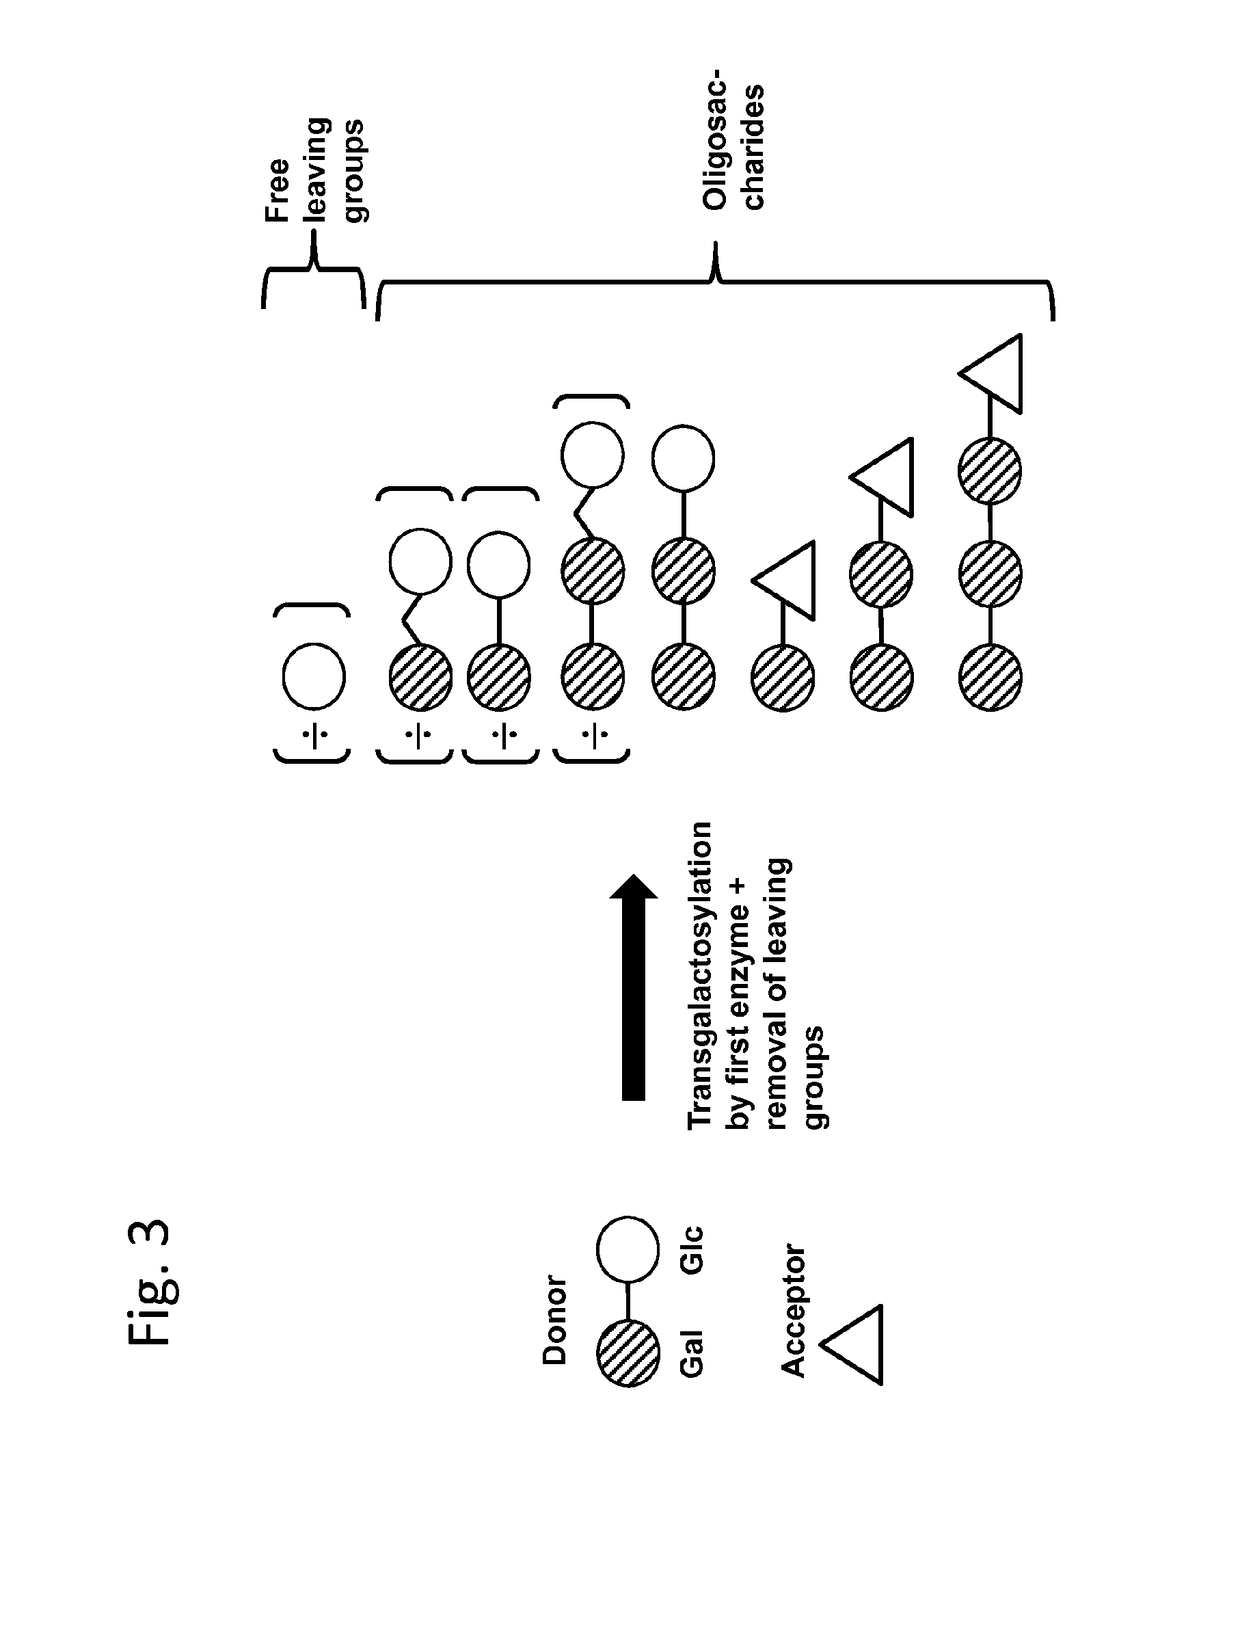 Method of producing a composition containing galacto-oligosacchardies